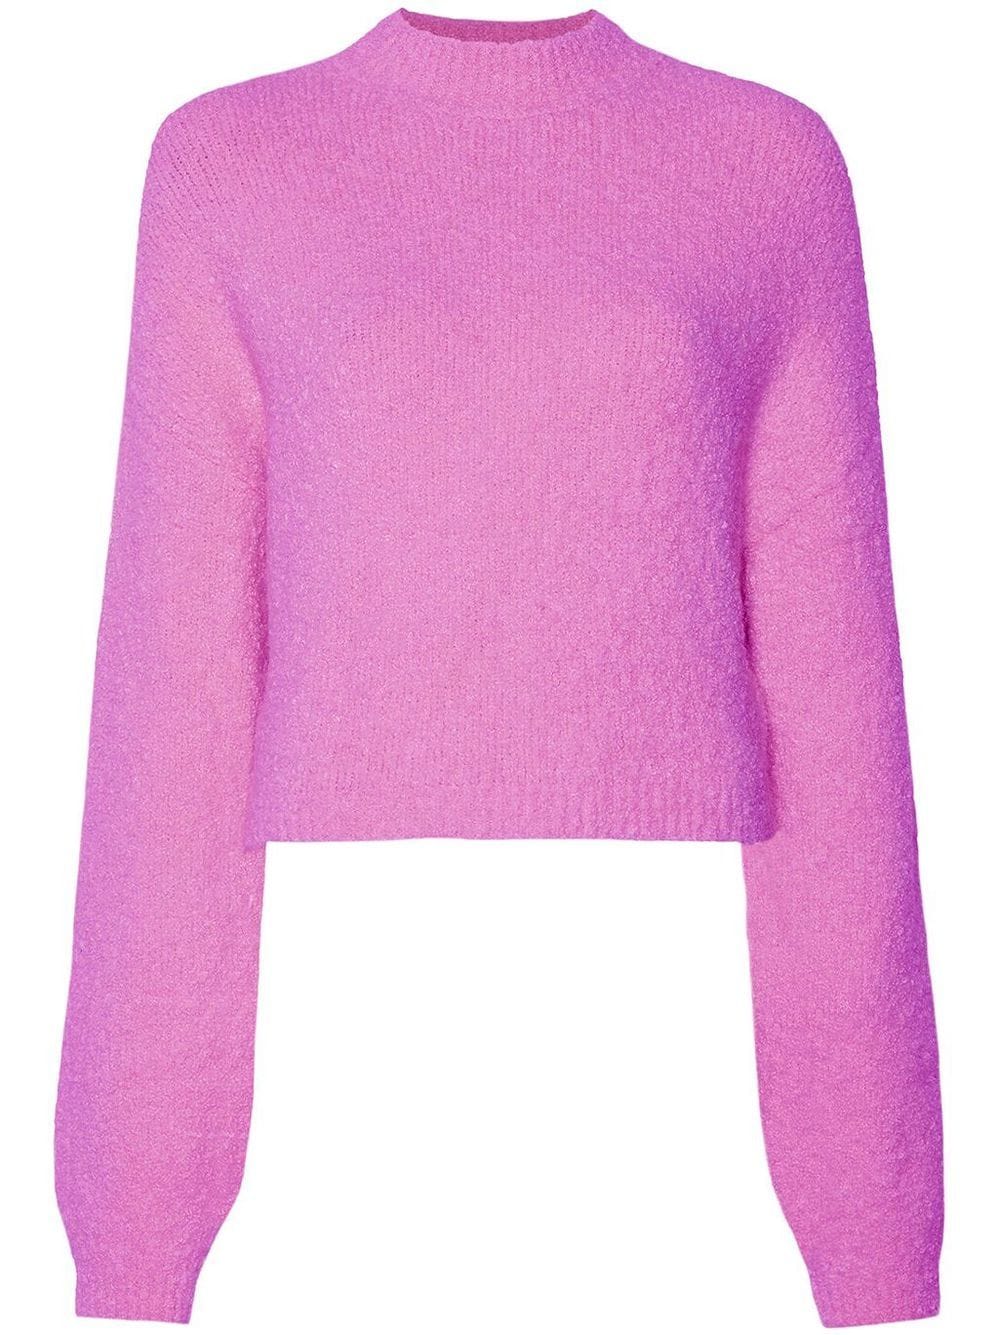 LAPOINTE LONG-SLEEVE CROPPED SWEATER